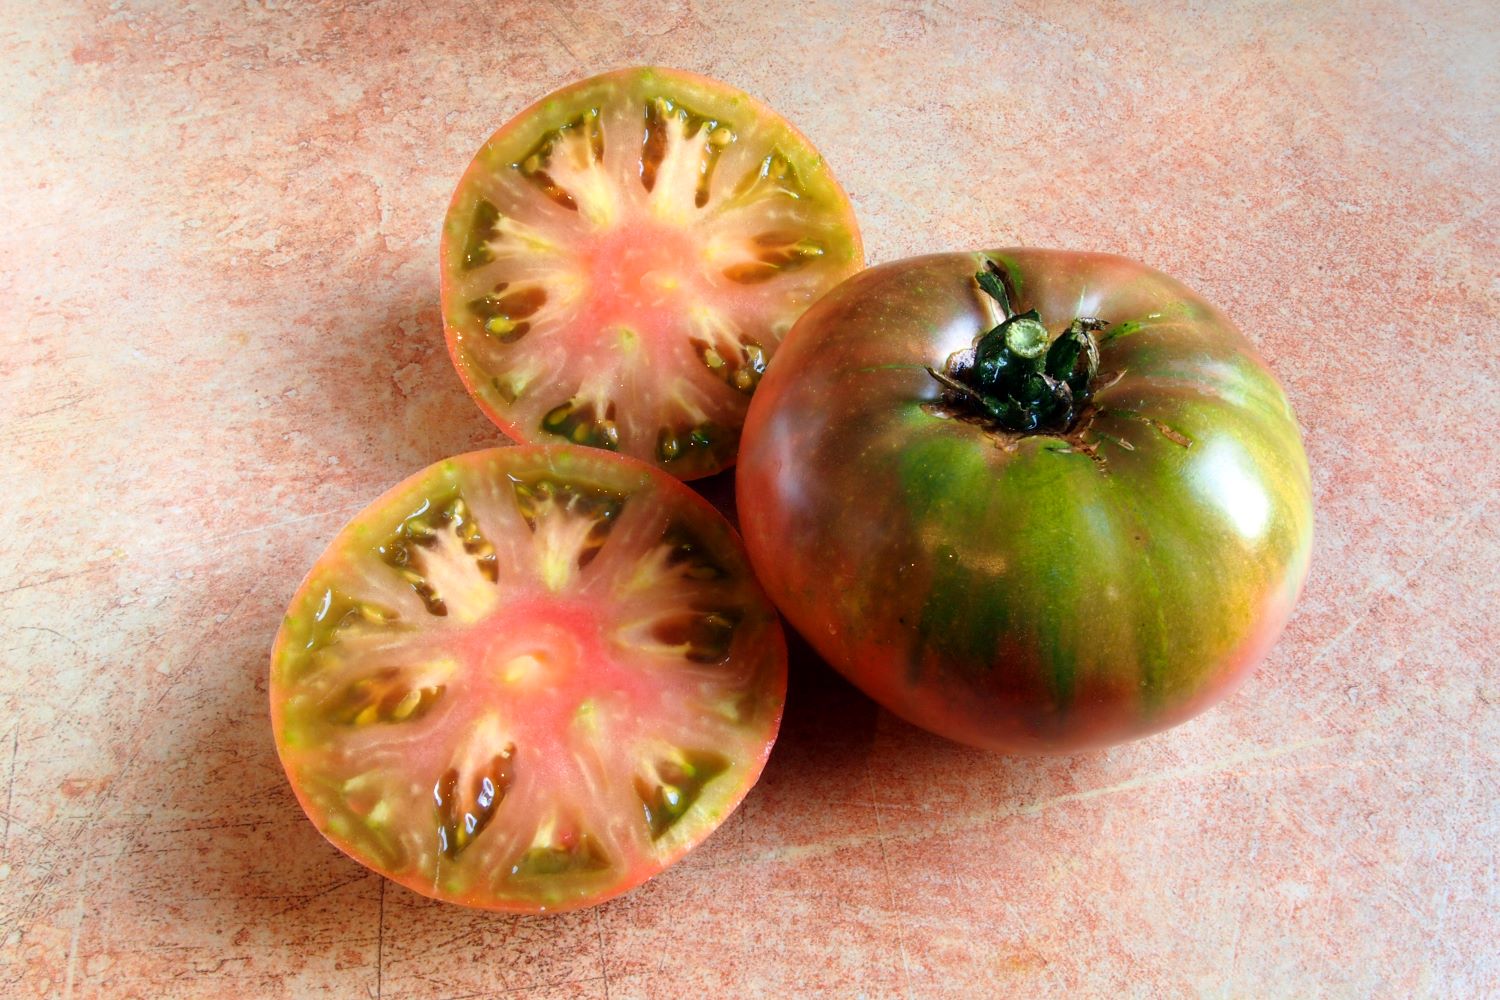 Great White Blue tomato seeds, large pale yellow and purple